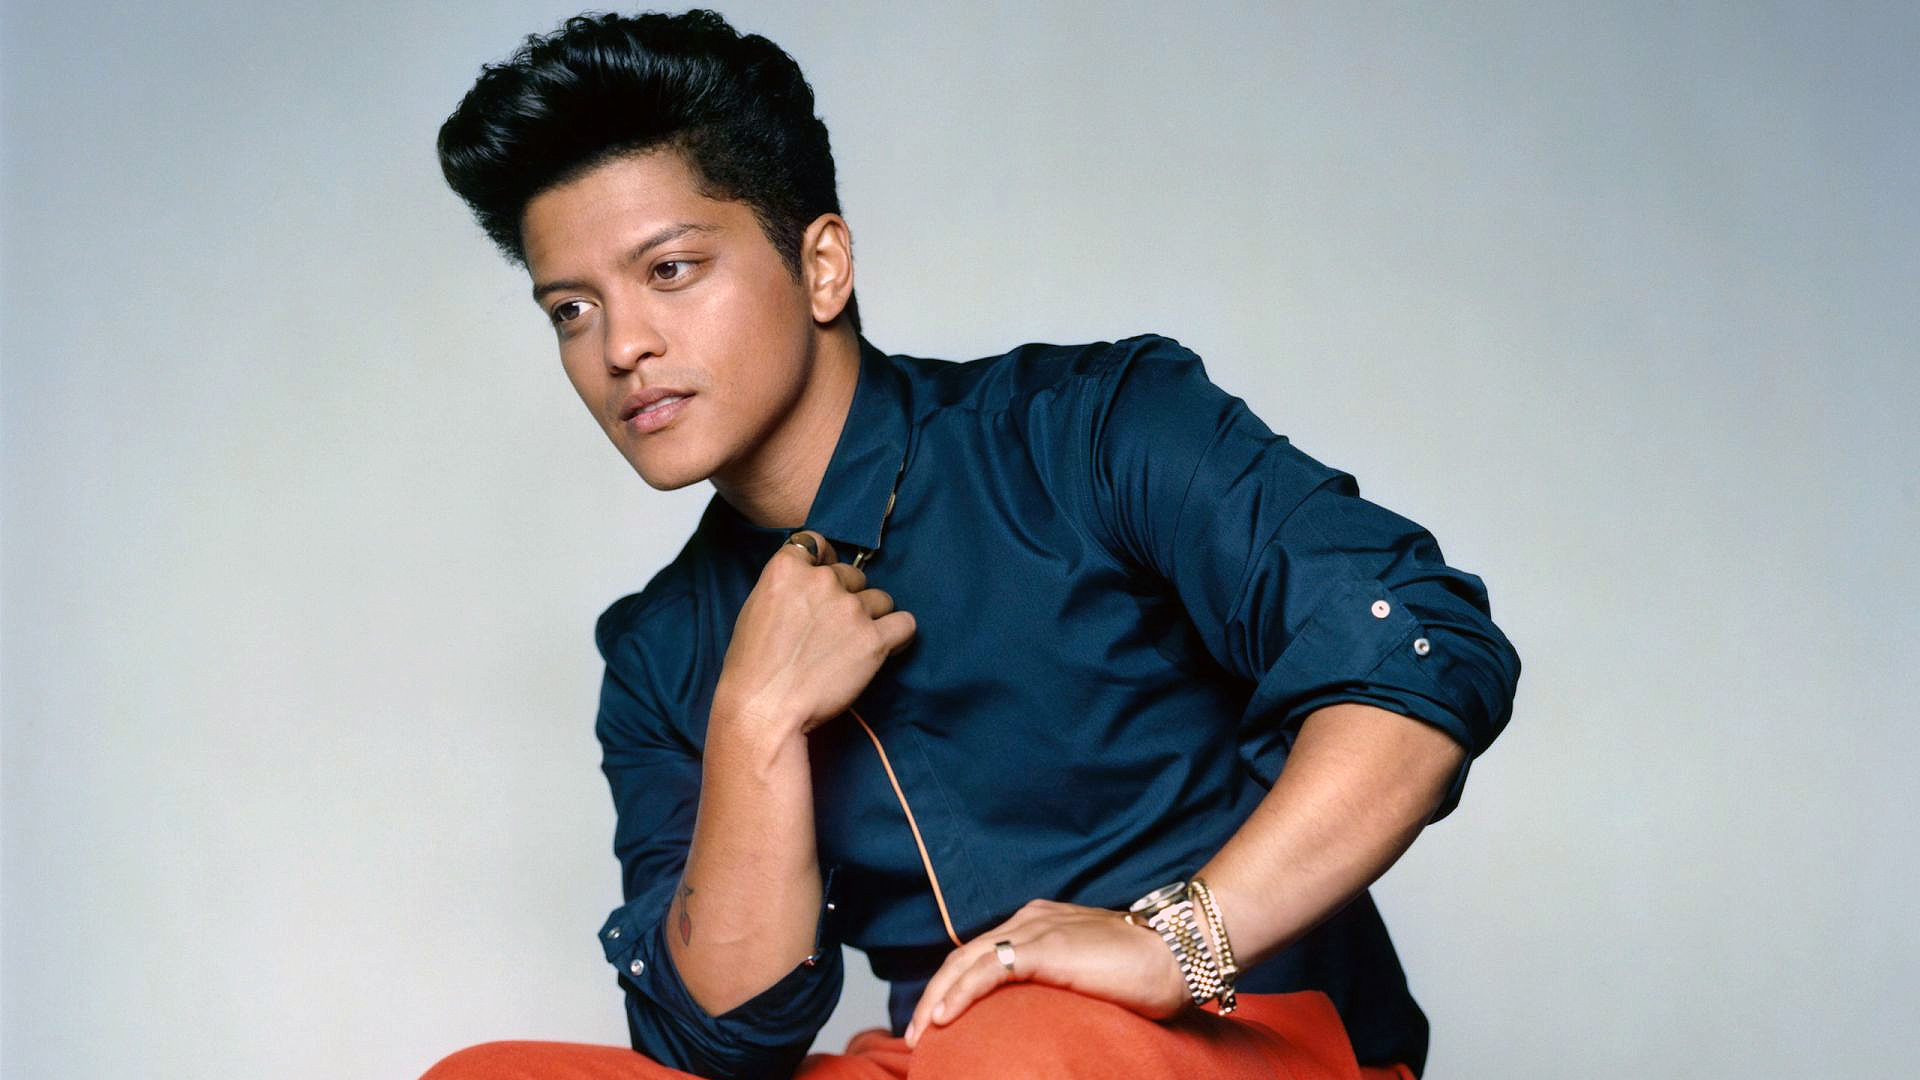 Free Download Bruno Mars Wallpaper High Definition High Quality Widescreen 19x1080 For Your Desktop Mobile Tablet Explore 47 Bruno Mars Wallpaper Mars Wallpaper X 1800 Mars Desktop Wallpaper Mars Wallpapers For Laptop